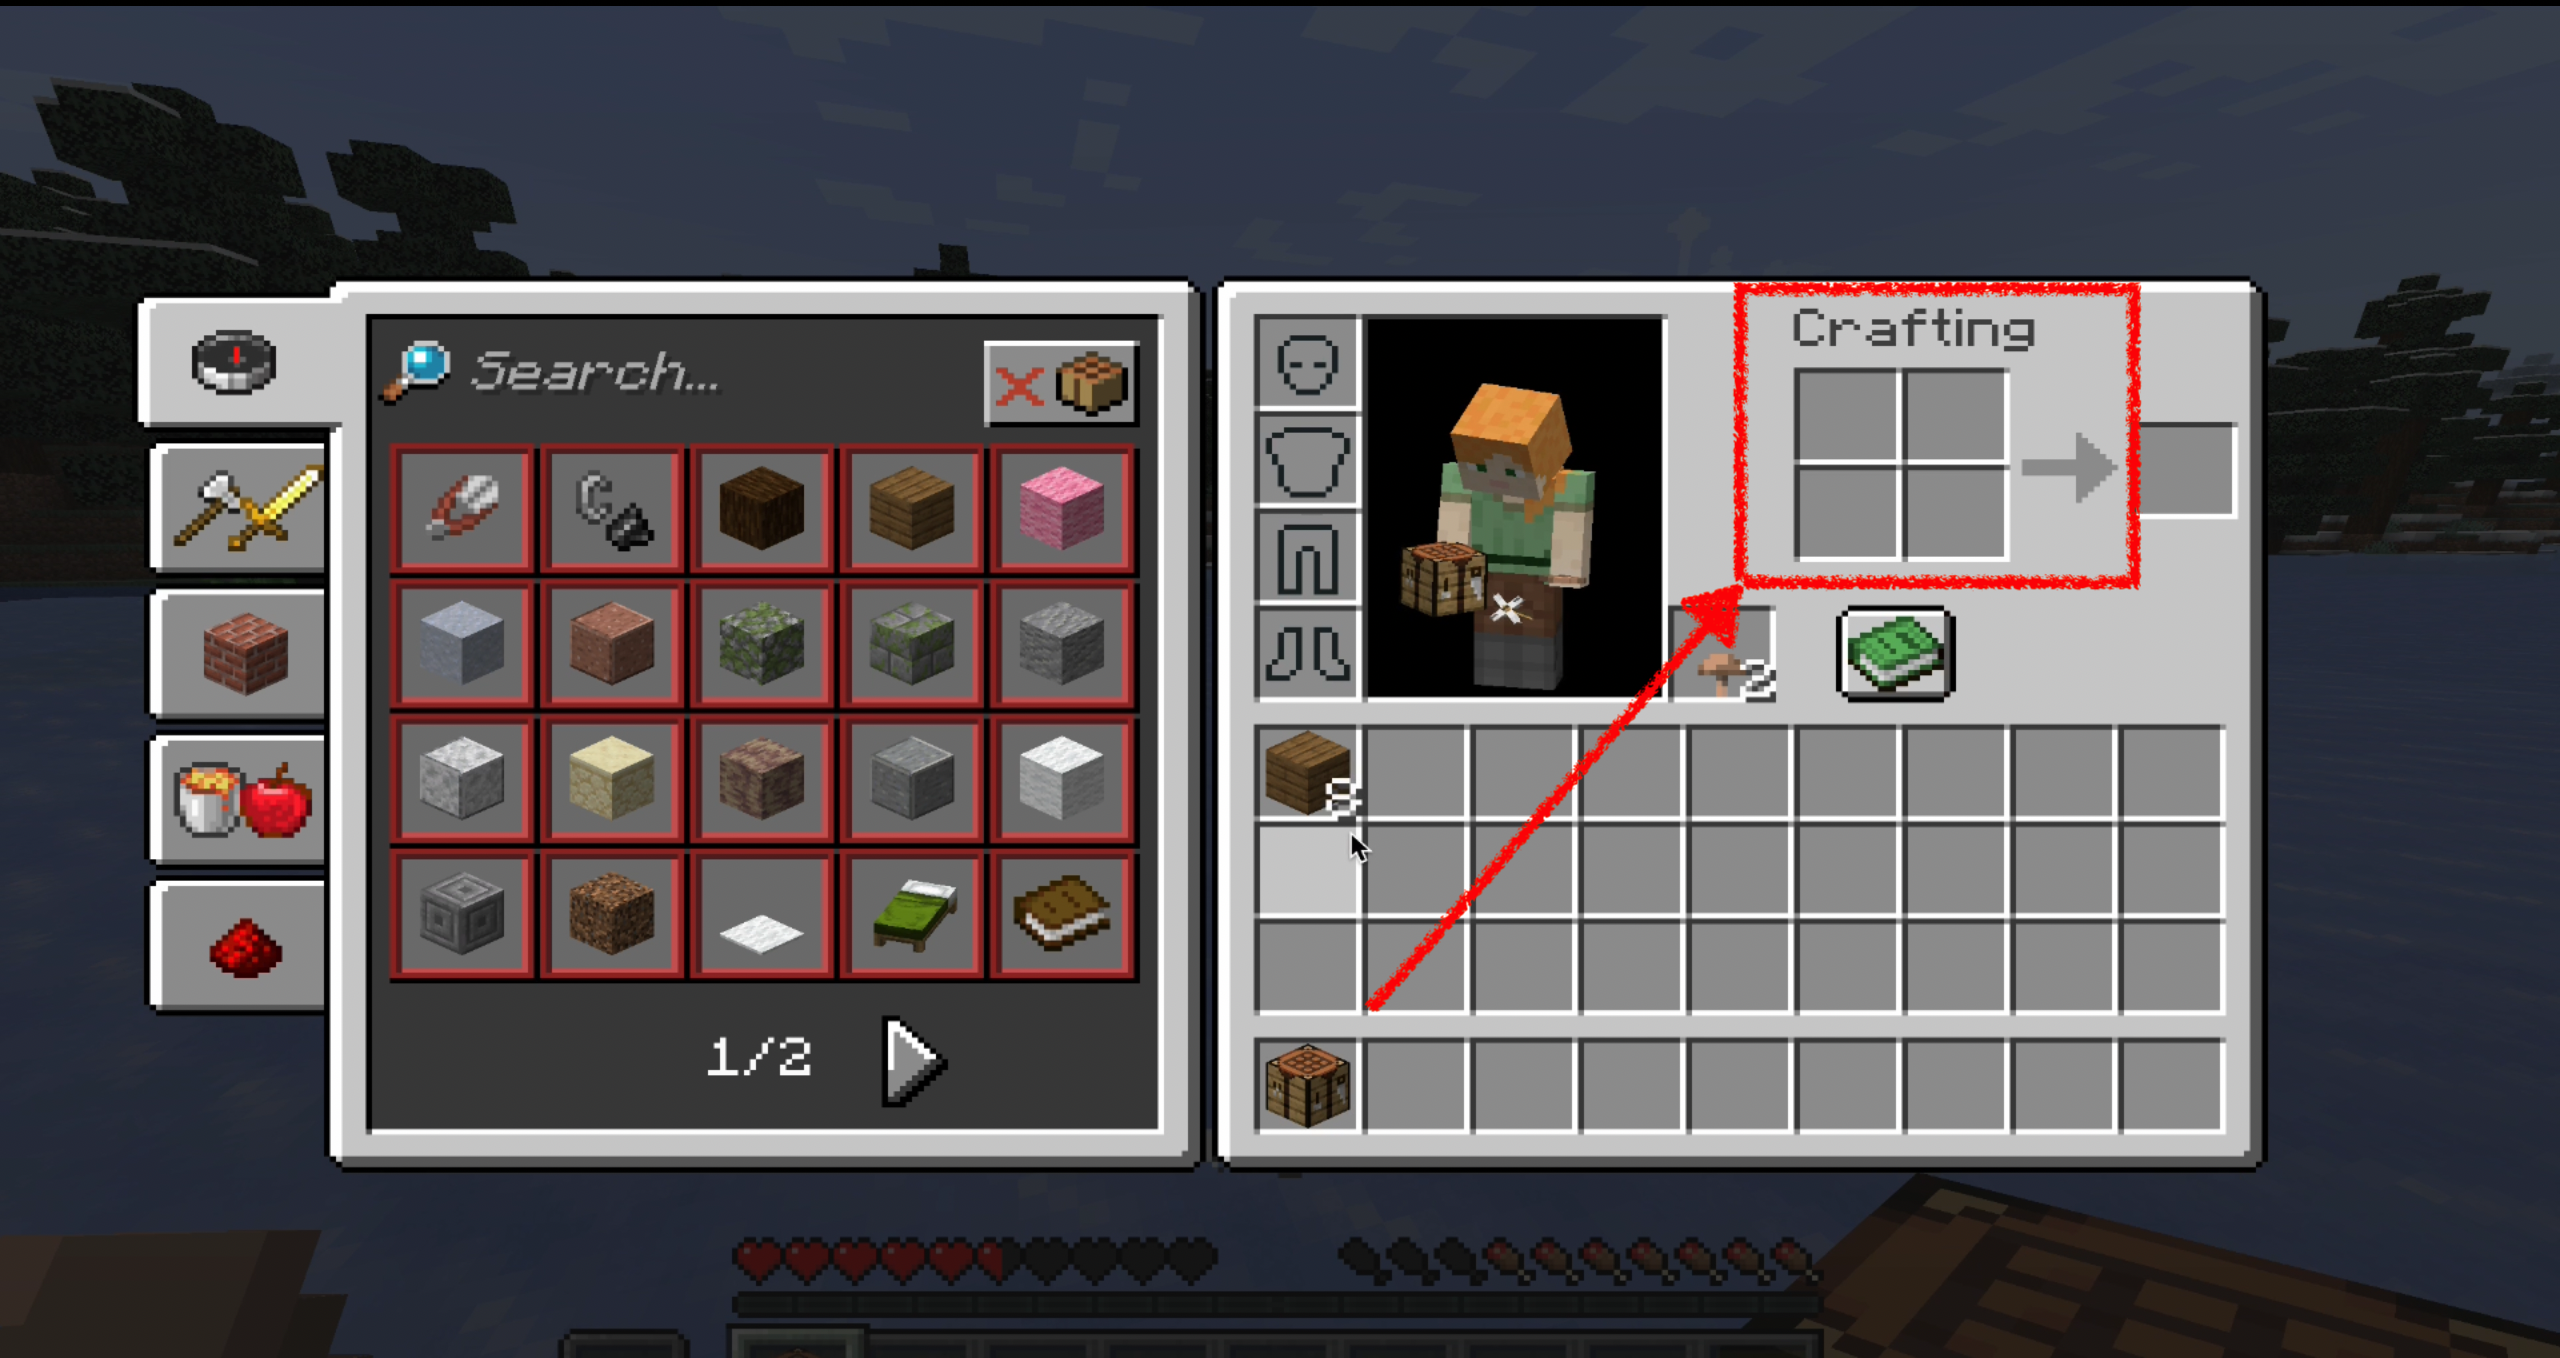 Open the Crafting Menu